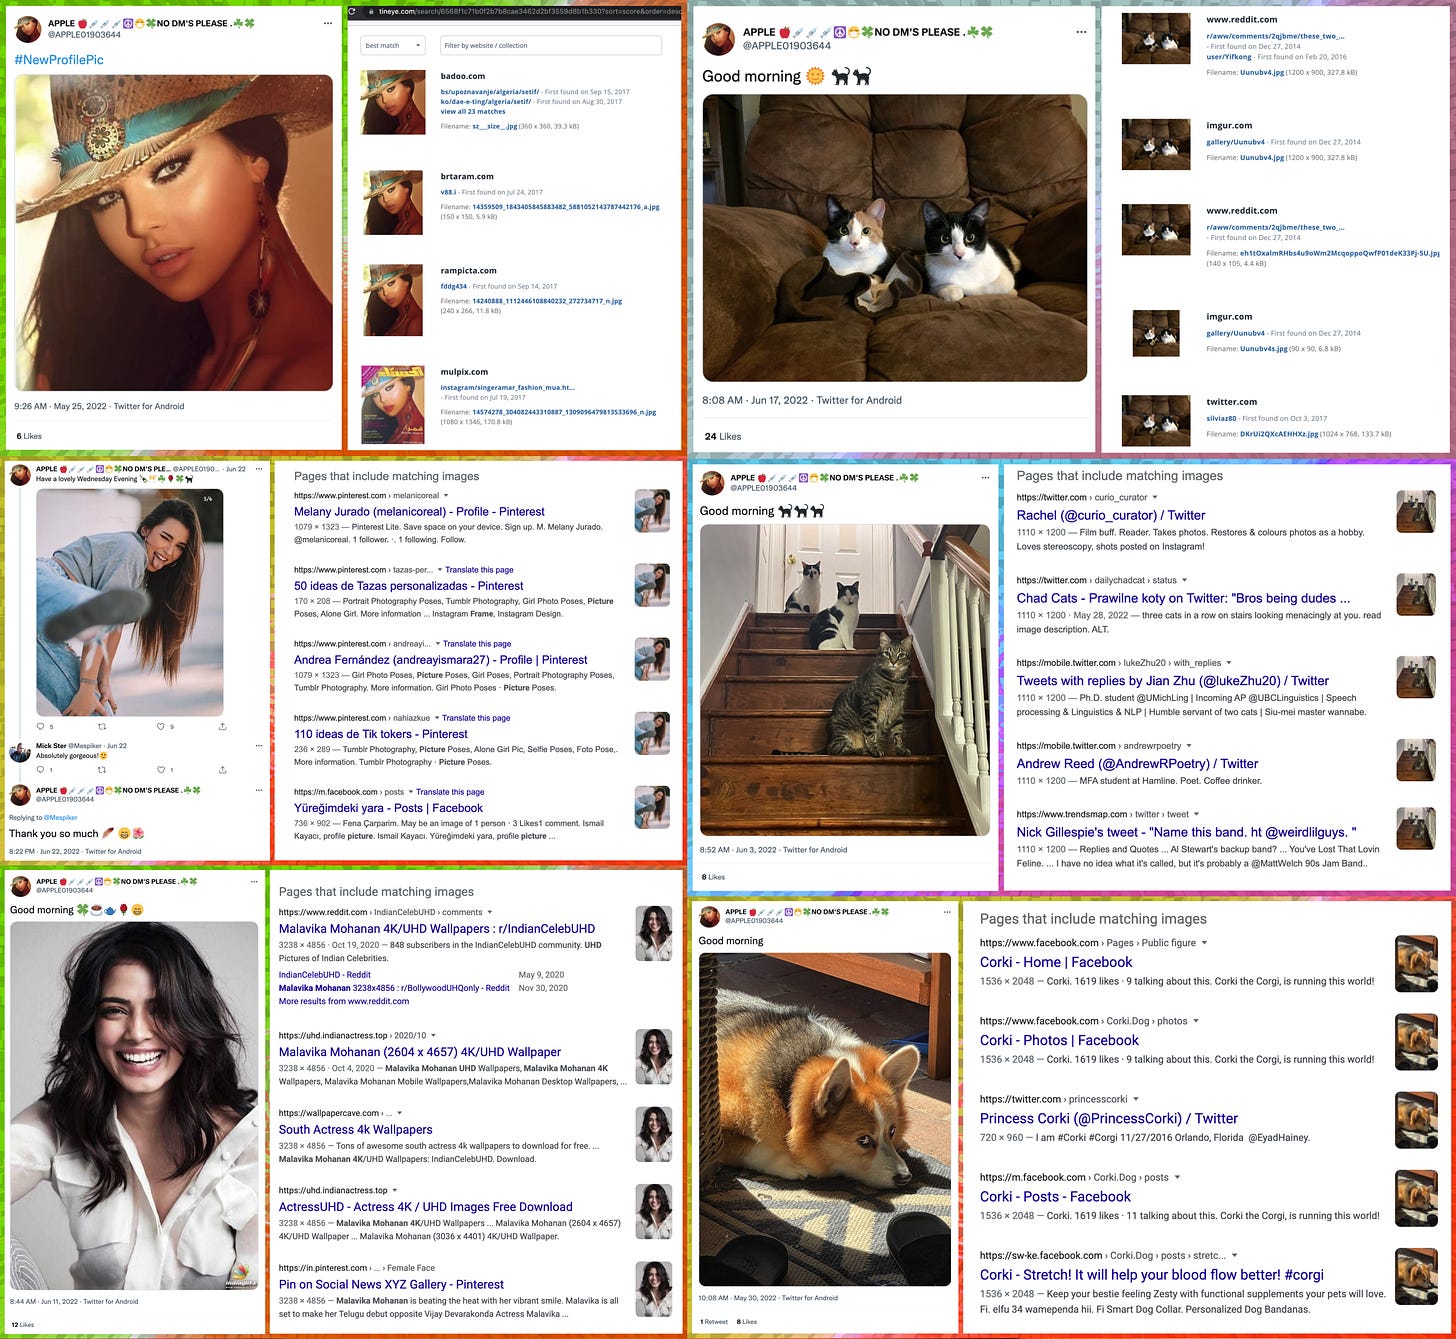 alleged photos of @APPLE01903644 and @APPLE01903644's pets, and reverse image searches showing the photos are plagiarized